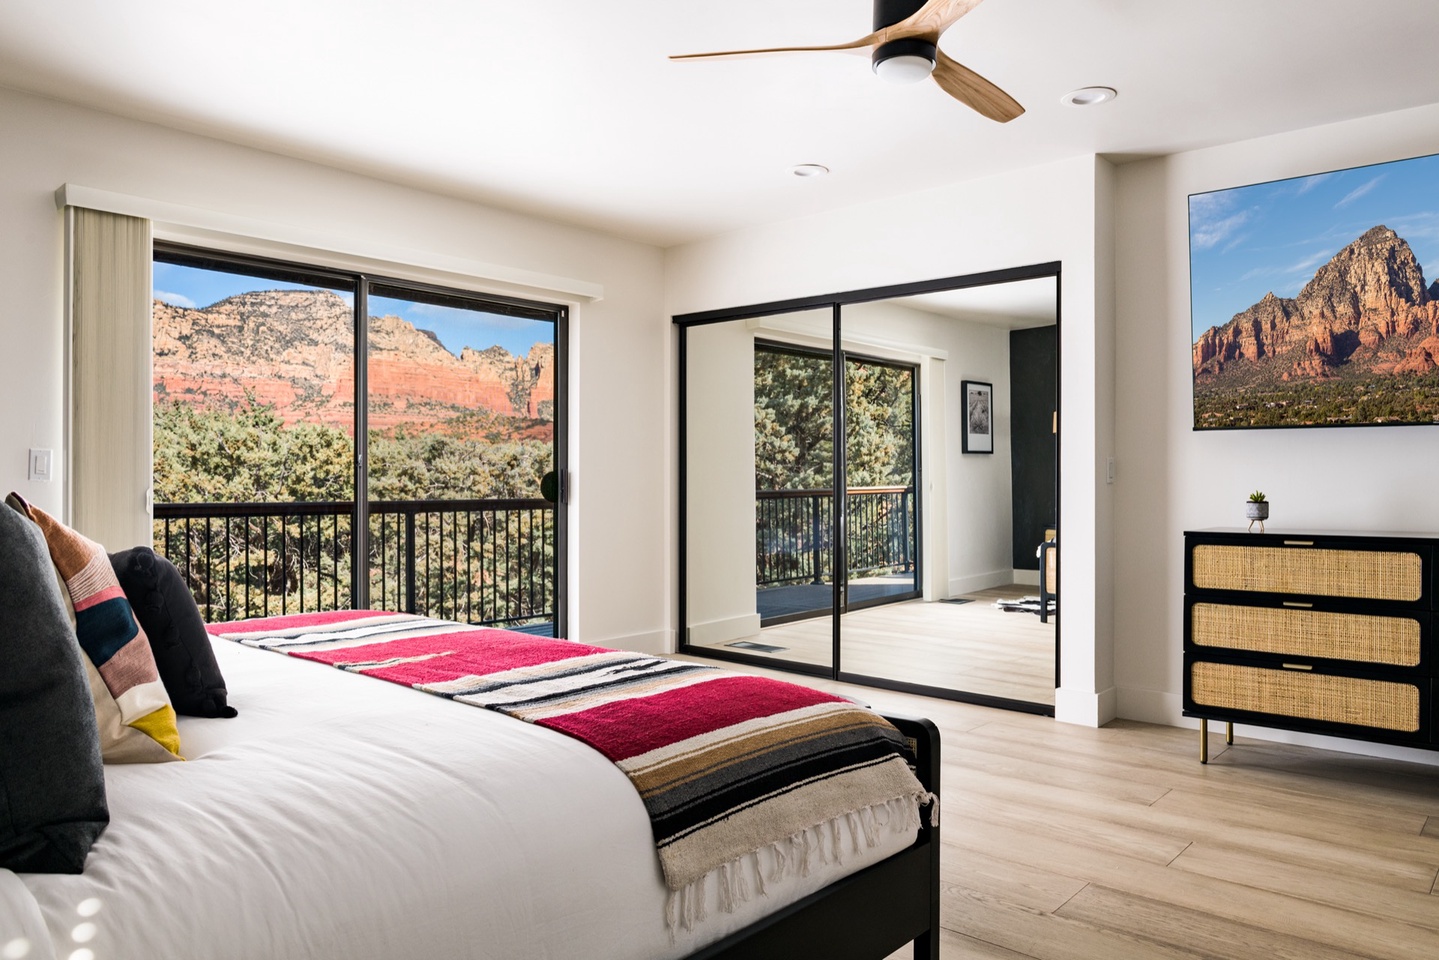 Incredible views for the Master bedroom